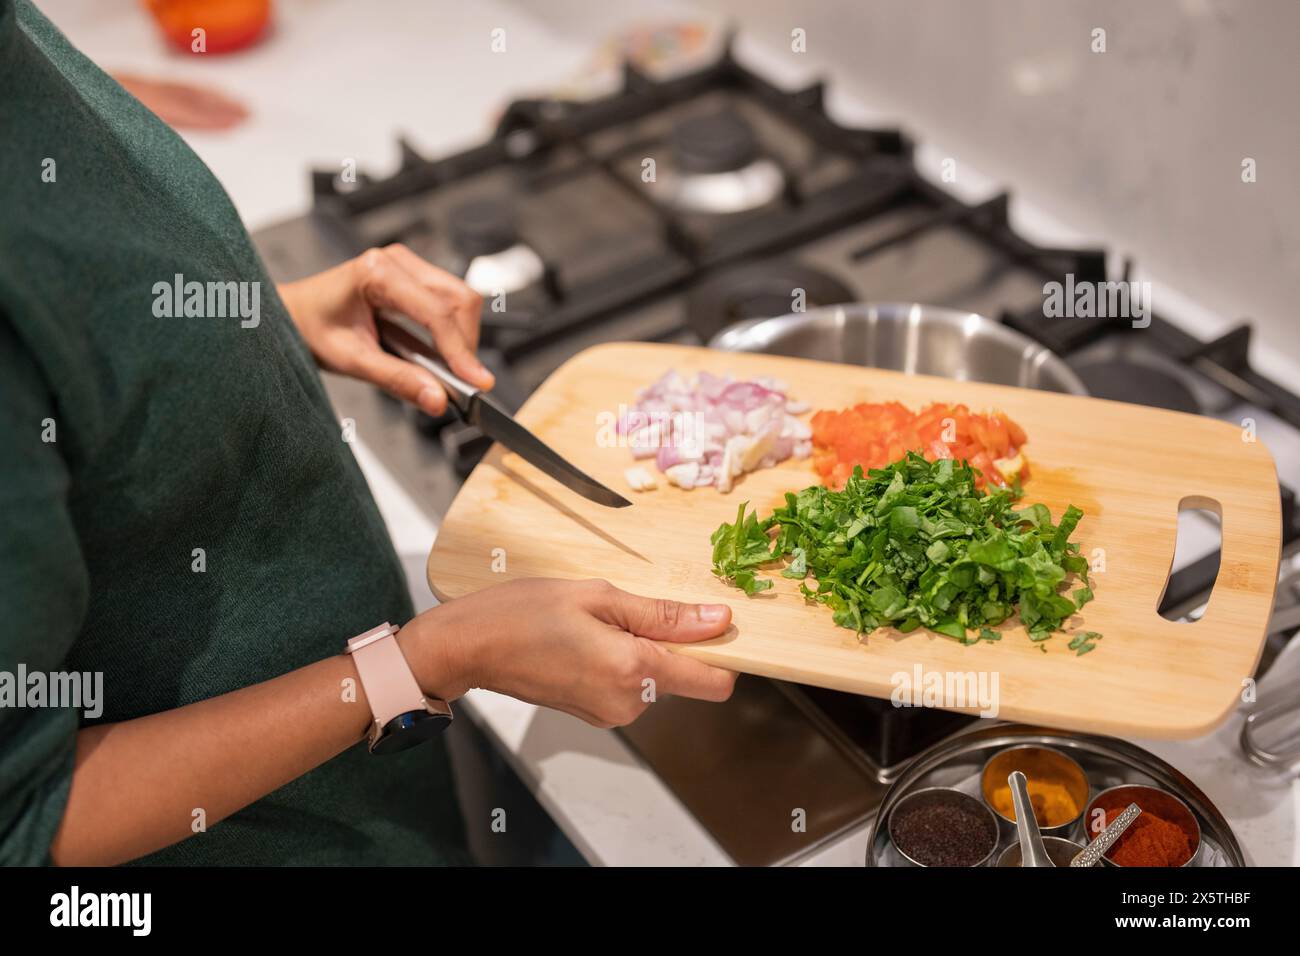 Woman holding cutting board with chopped vegetables Stock Photo